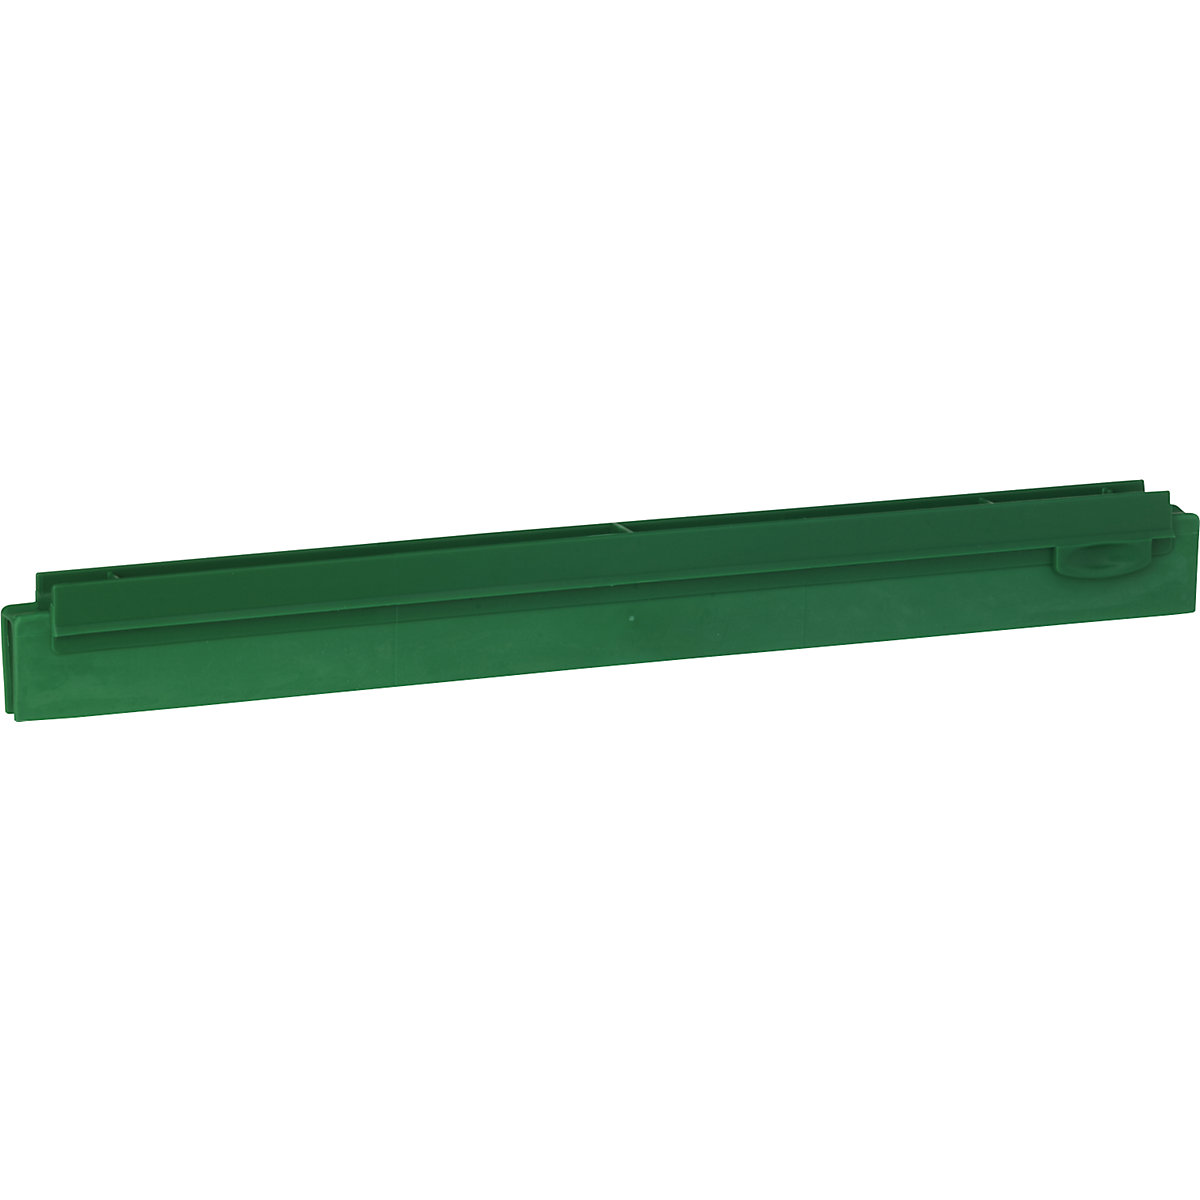 Replacement cartridge, hygienic – Vikan, length 400 mm, pack of 10, green-3